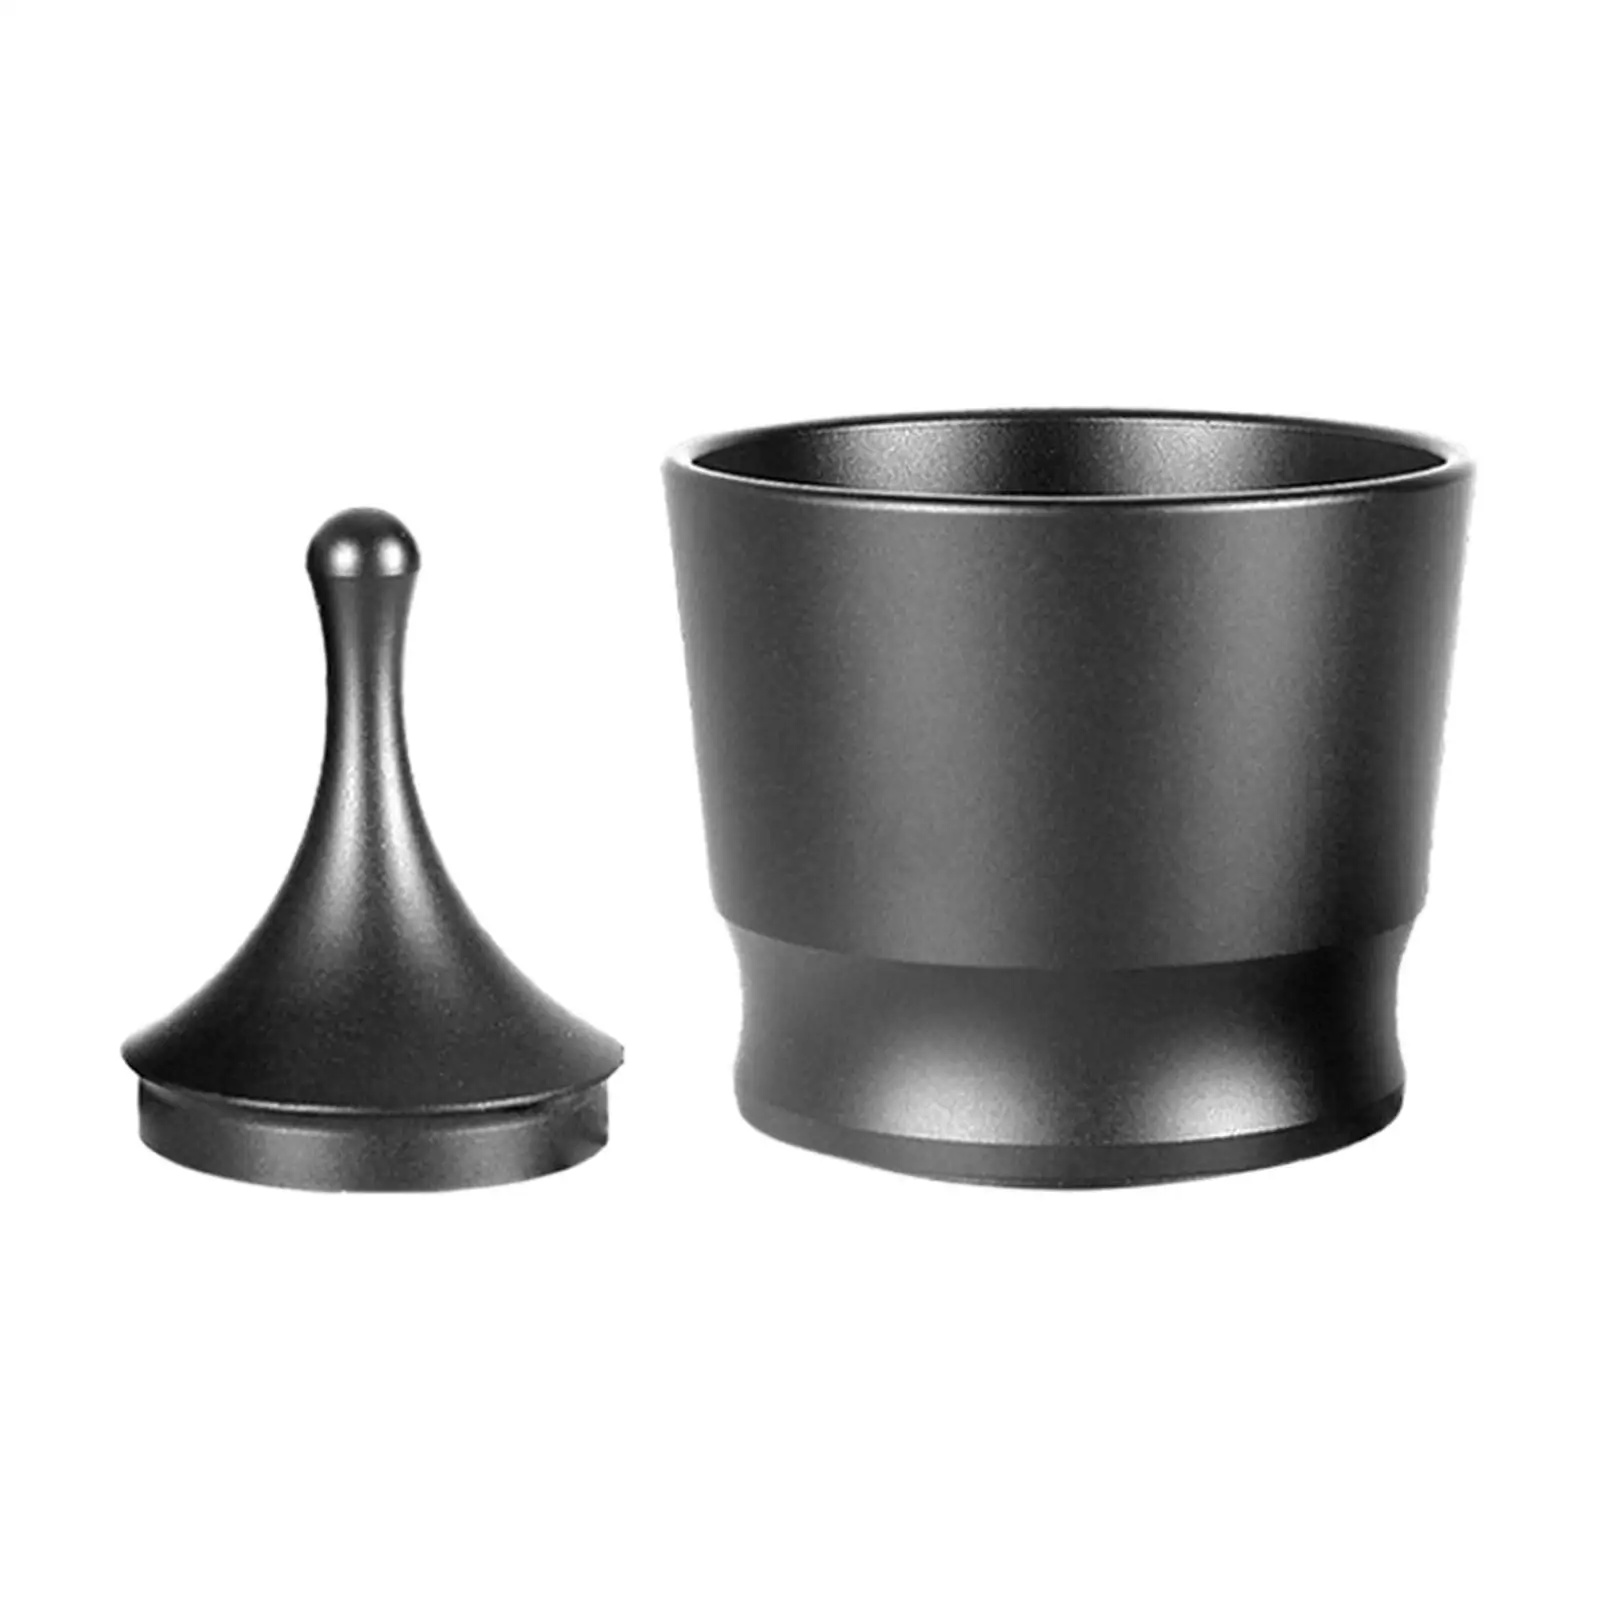 Coffee Dosing Cup Kitchen DIY Tools Coffee Dosing Cup Mugs for Bar Home Cafe